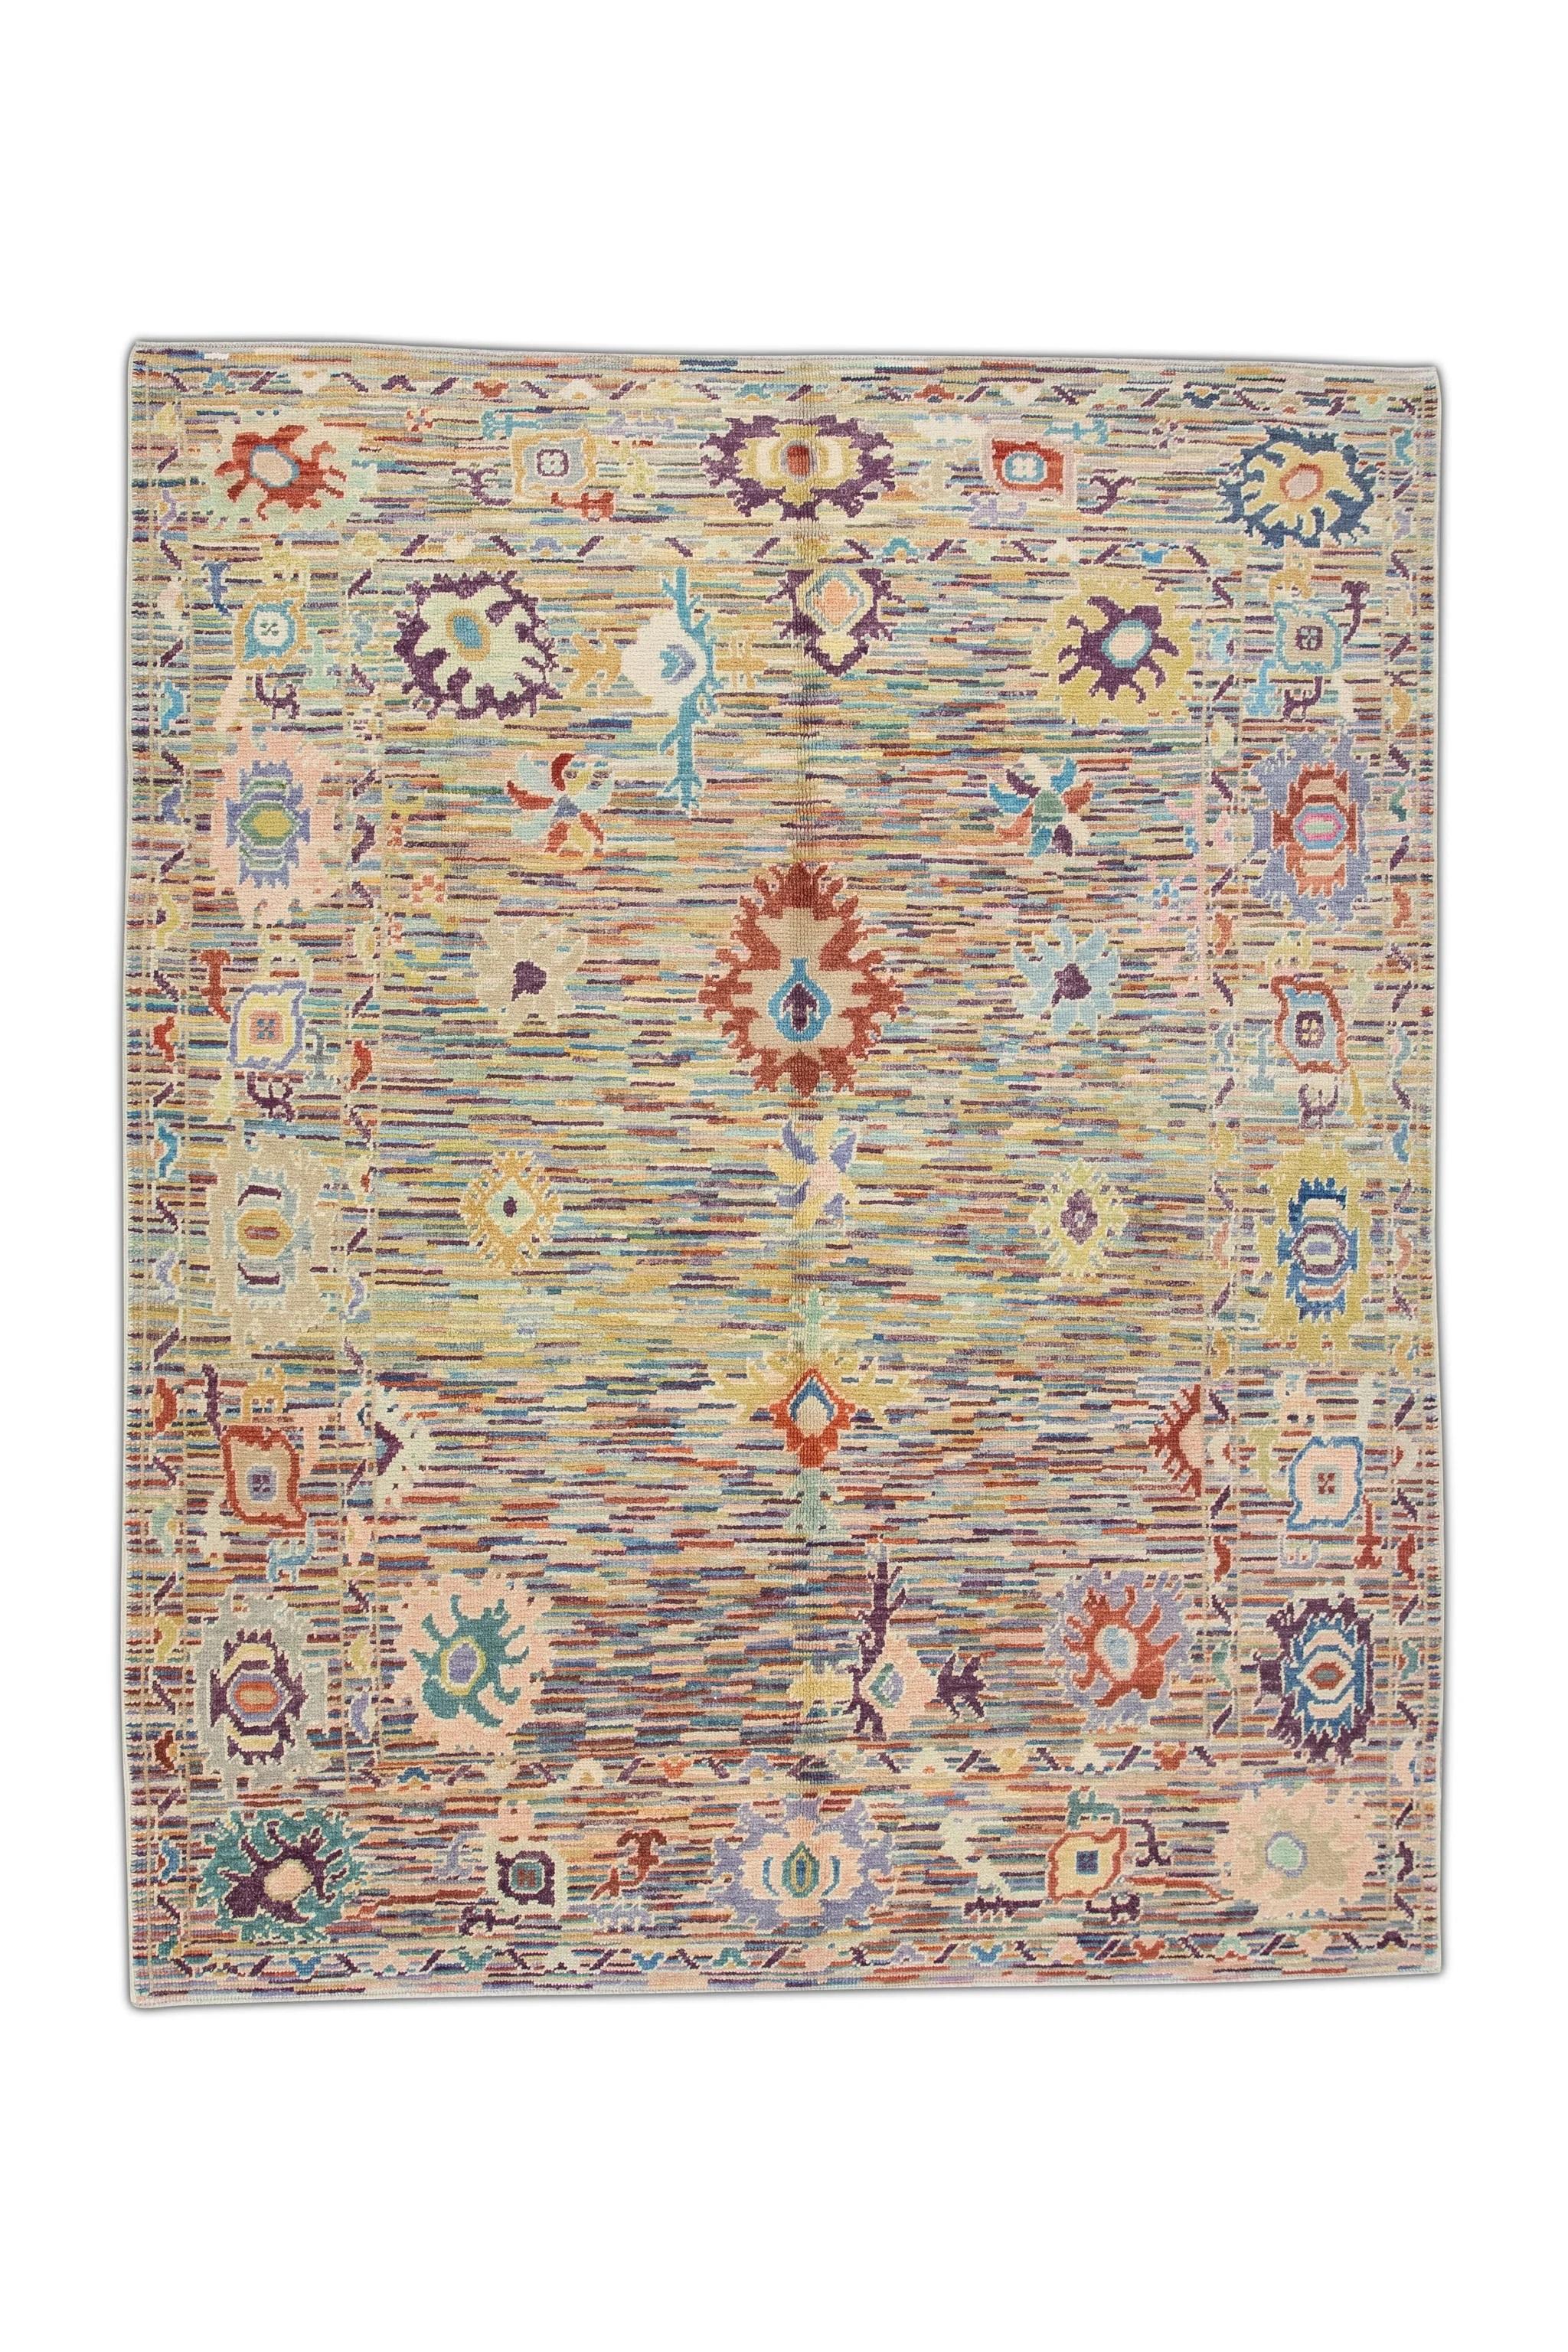 Handwoven Wool Turkish Oushak Rug in Colorful Geometric Floral Design 8' x 10'1